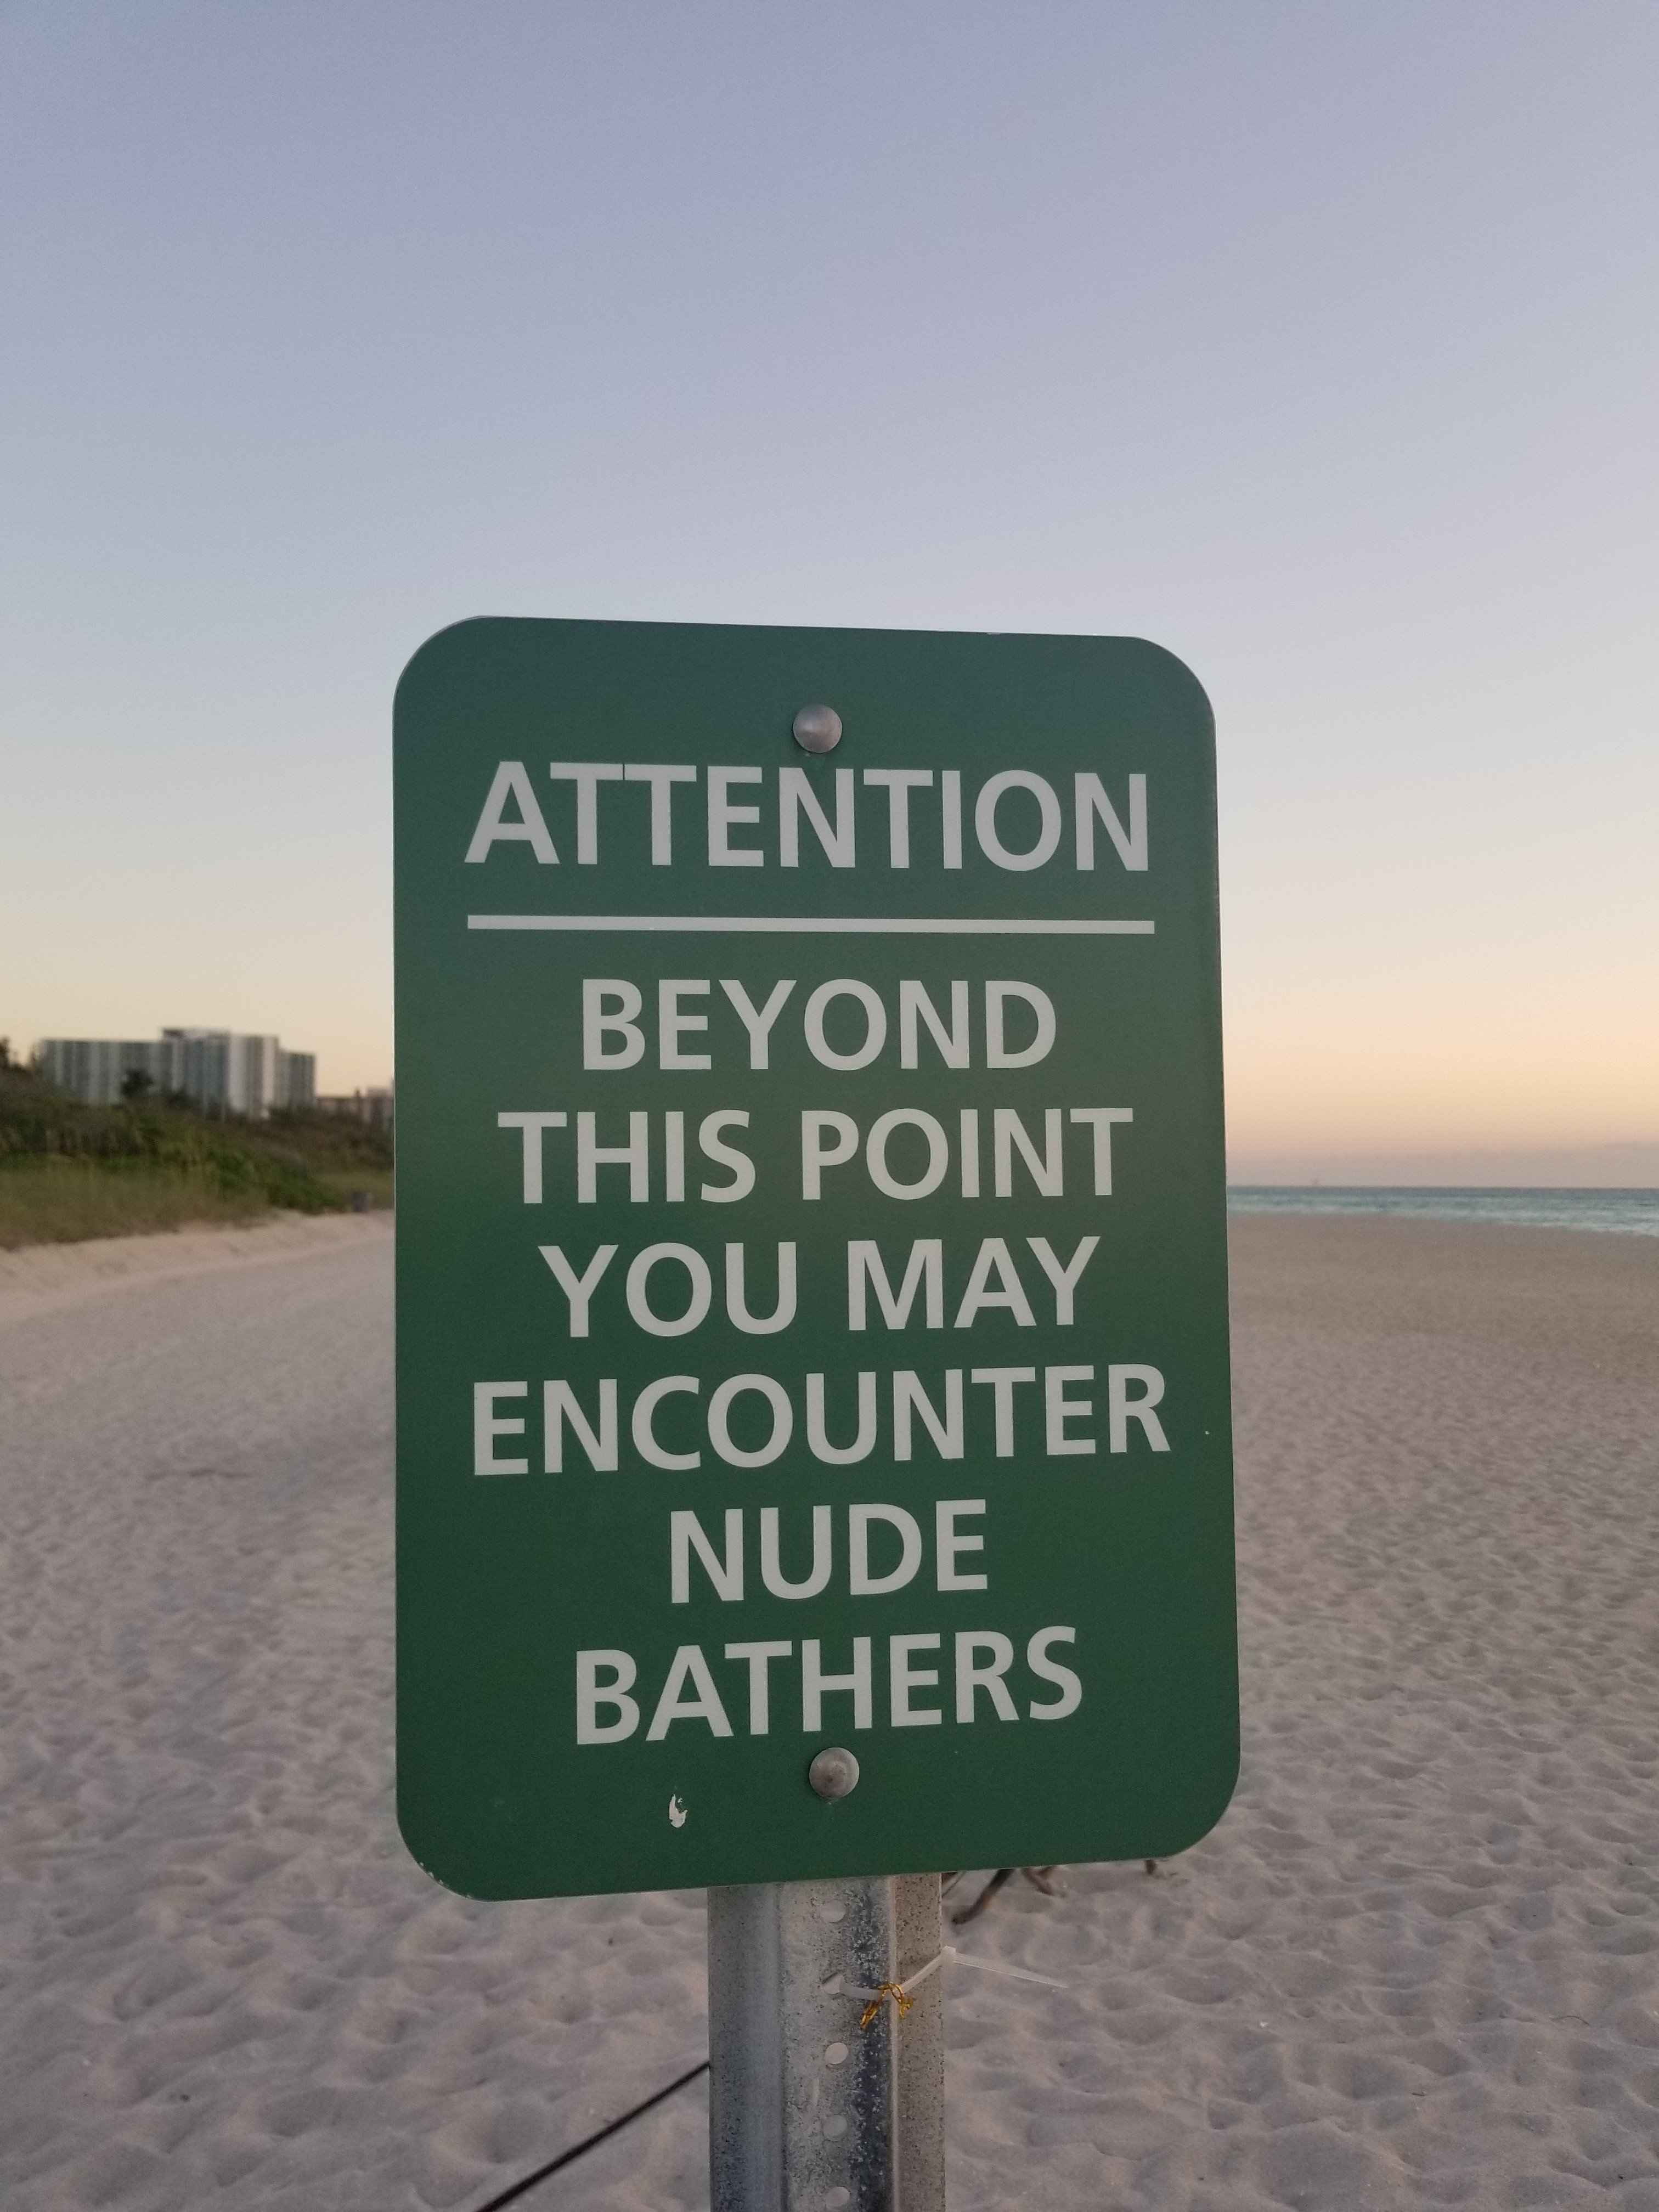 Public nudity is generally taboo in Asia, but for those who wish to bathe in their birthday suit, here are 8 of the world’s best nudist beaches, from Haulover Beach, Miami (above) to Mar Bella in Barcelona. Photo: Shutterstock